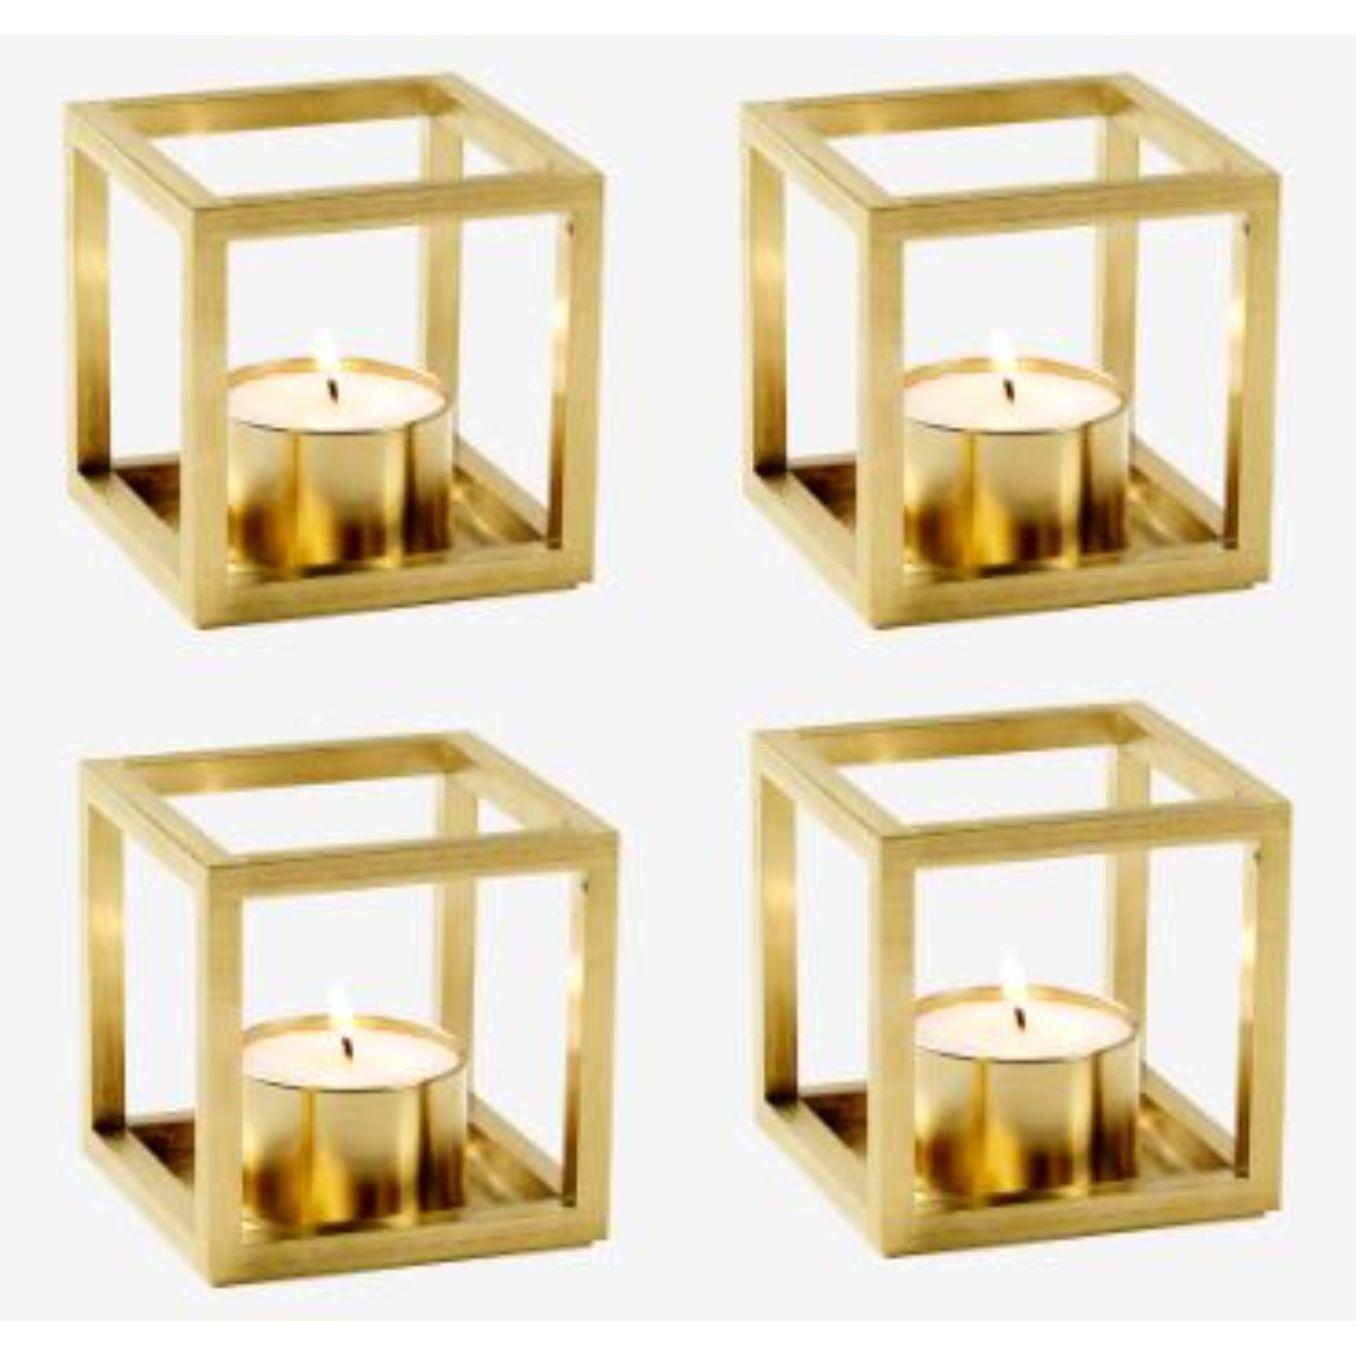 Set of 4 gold plated Kubus T candle holders by Lassen
Dimensions: D 7 x W 7 x H 7 cm 
Materials: Metal 
Also available in different dimensions and colors. 
Weight: 0.40 Kg

The tealight, Kubus T, is added to the Kubus collection in 2018,